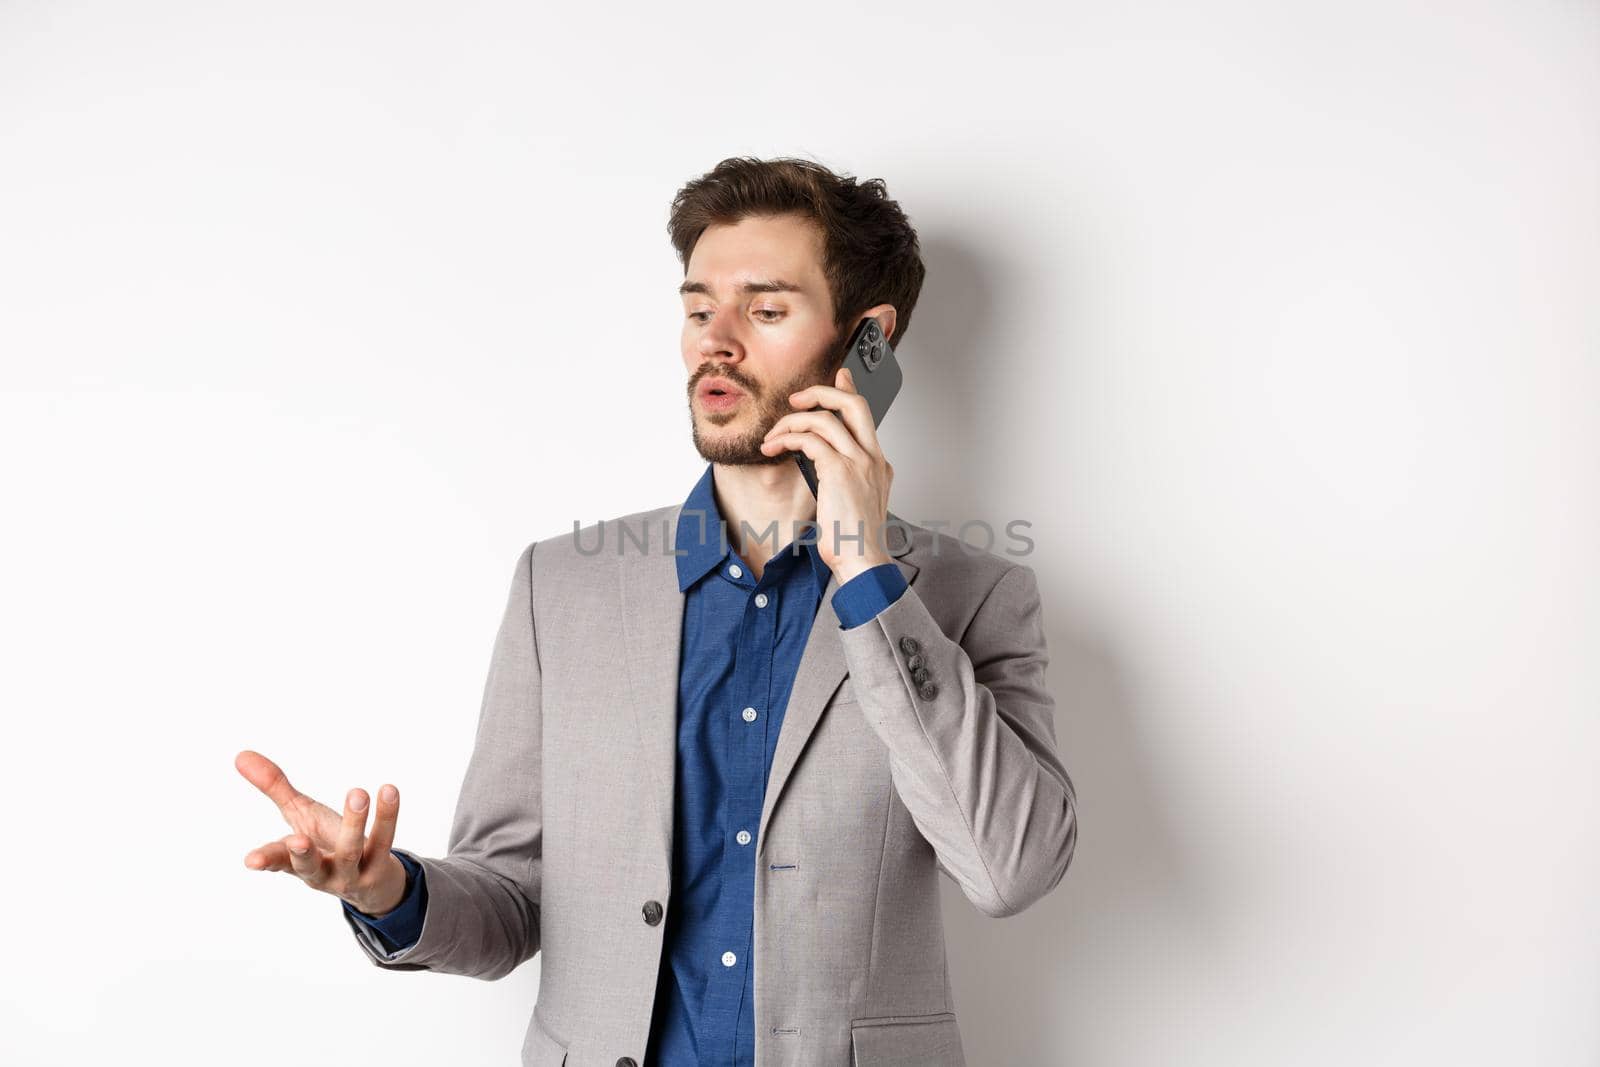 Handsome businessman having business call on phone, gesturing while talking on mobile, having conversation, white background.